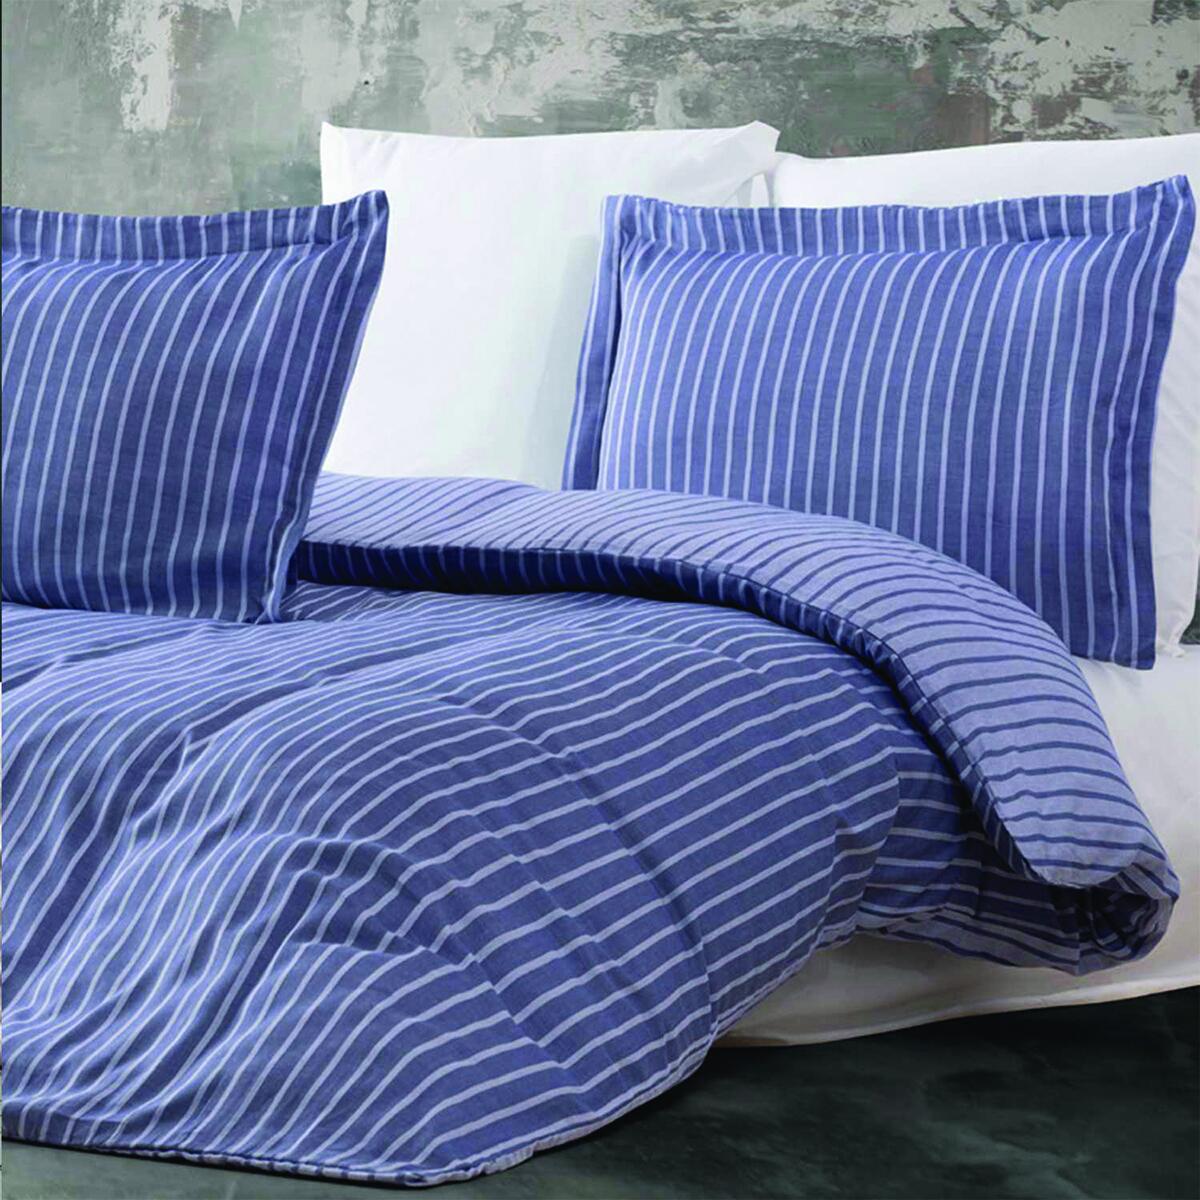 Bamboo Striped Navy Blue Double Duvet Cover Set